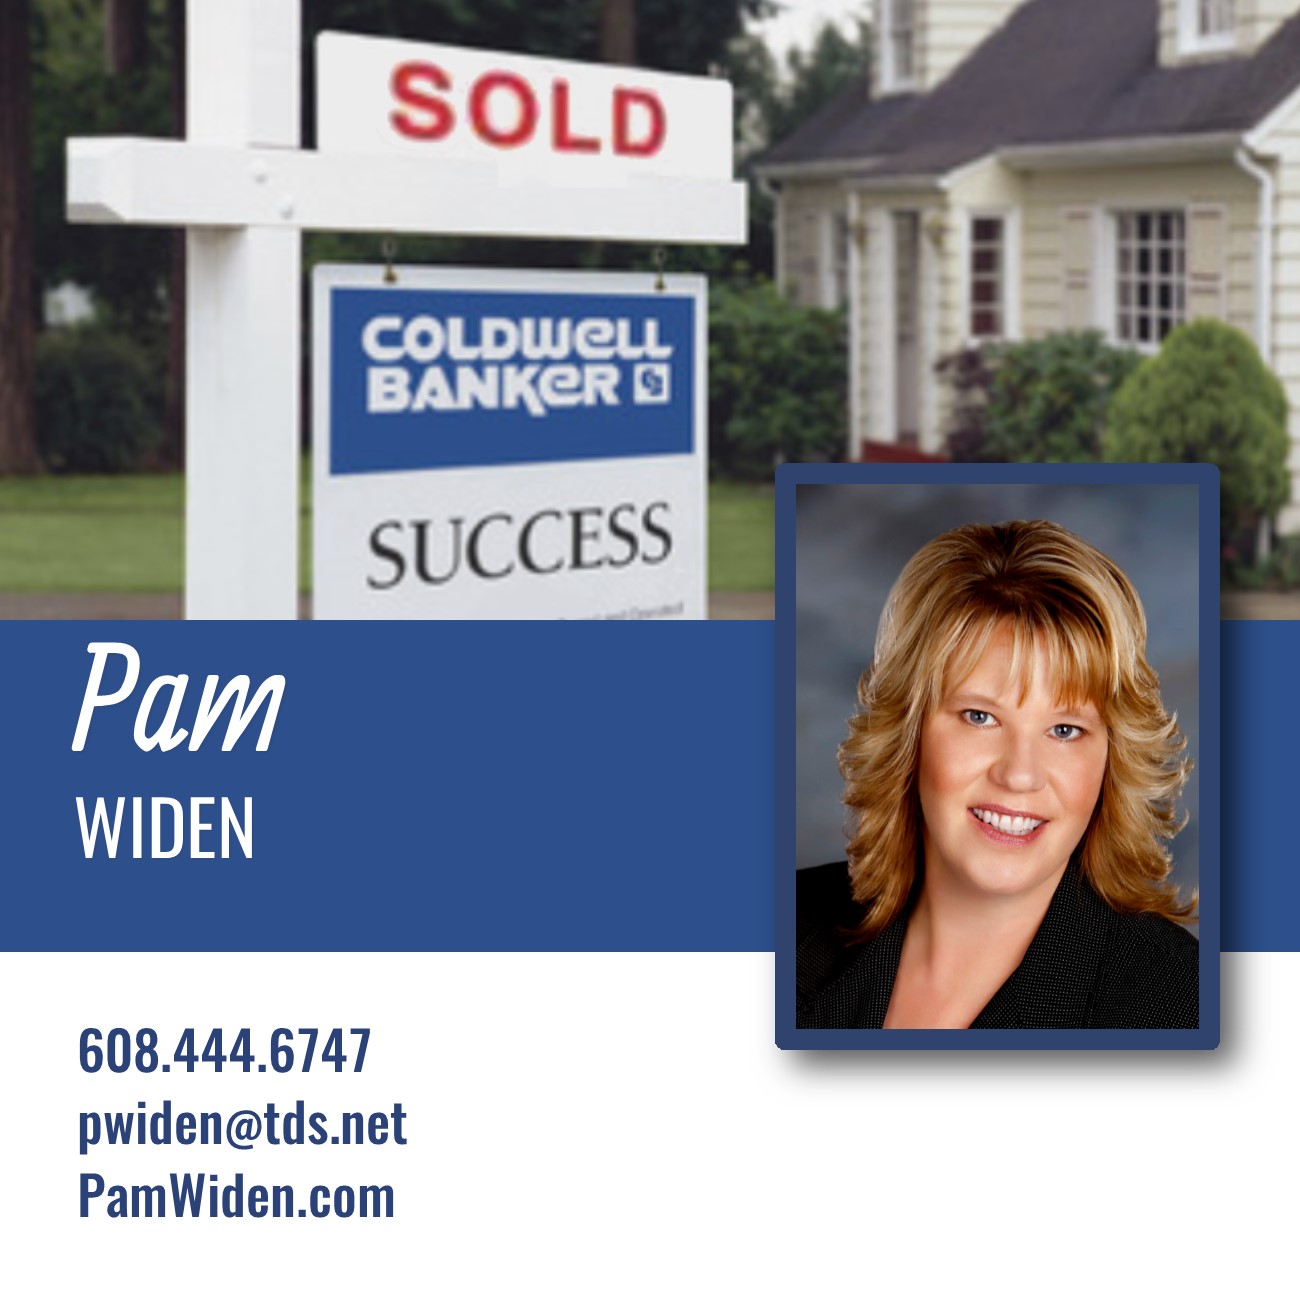 Pam is Fantastic to Work With